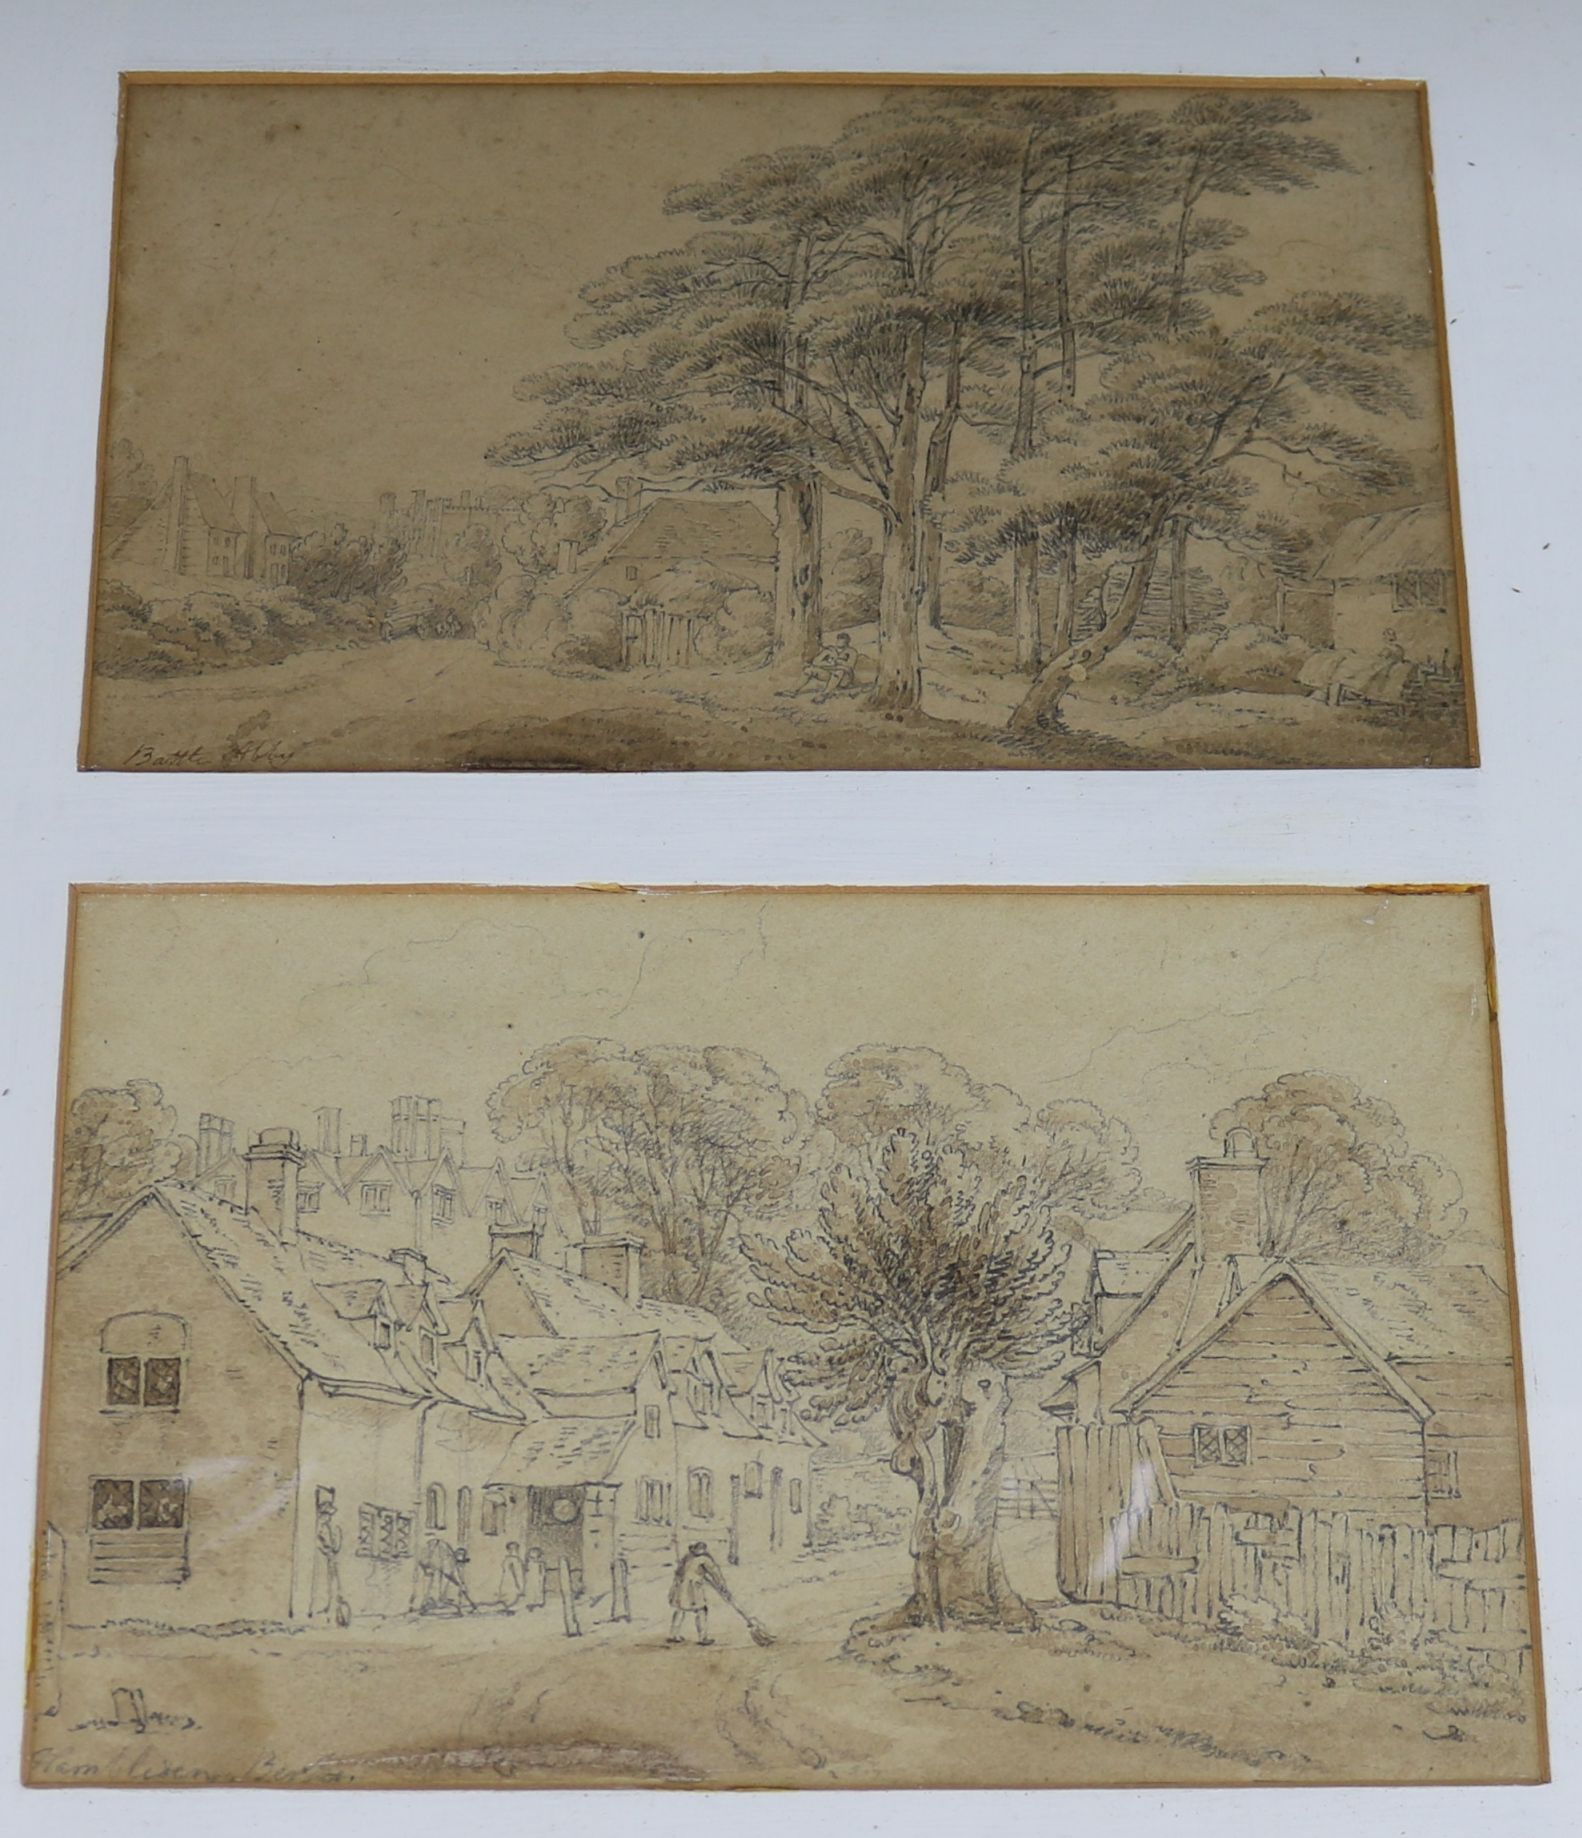 Two 19th century pencil sketches, Battle and Berkshire, framed as one largest 14 x 21cm.